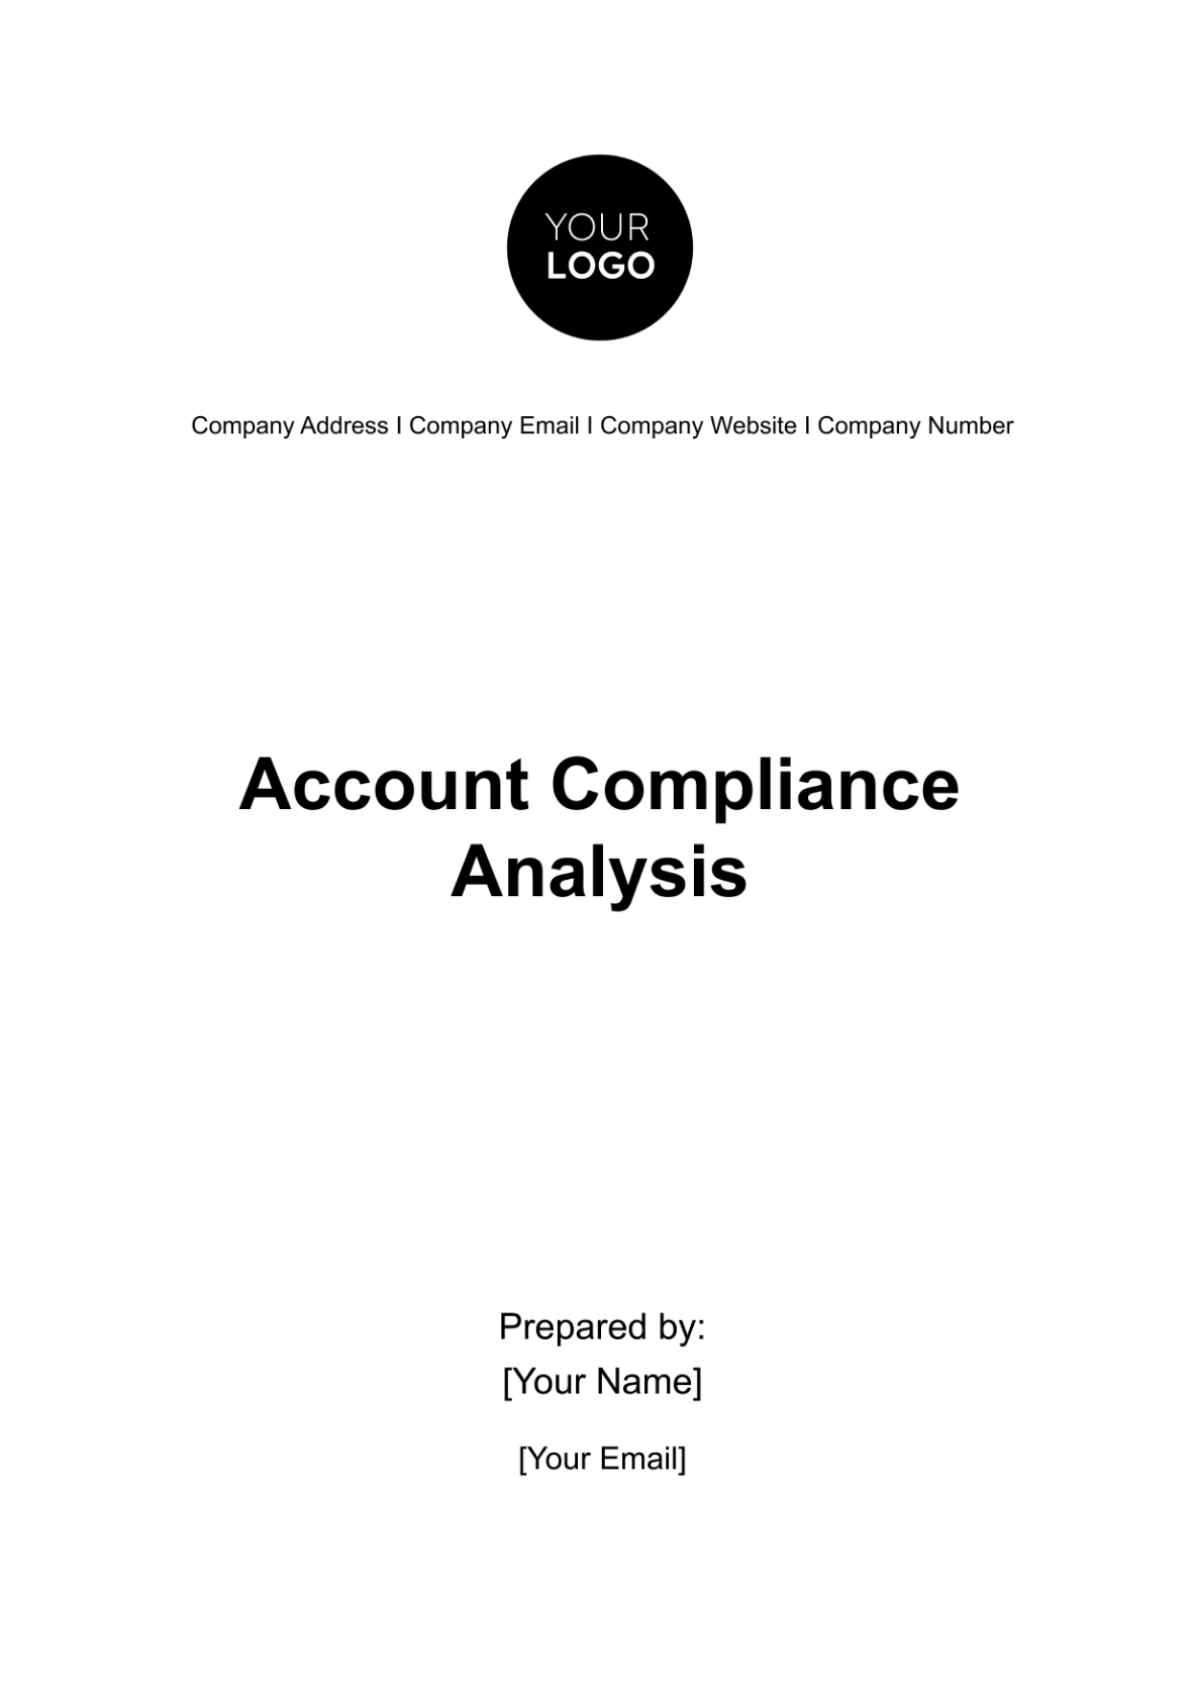 Account Compliance Analysis Template